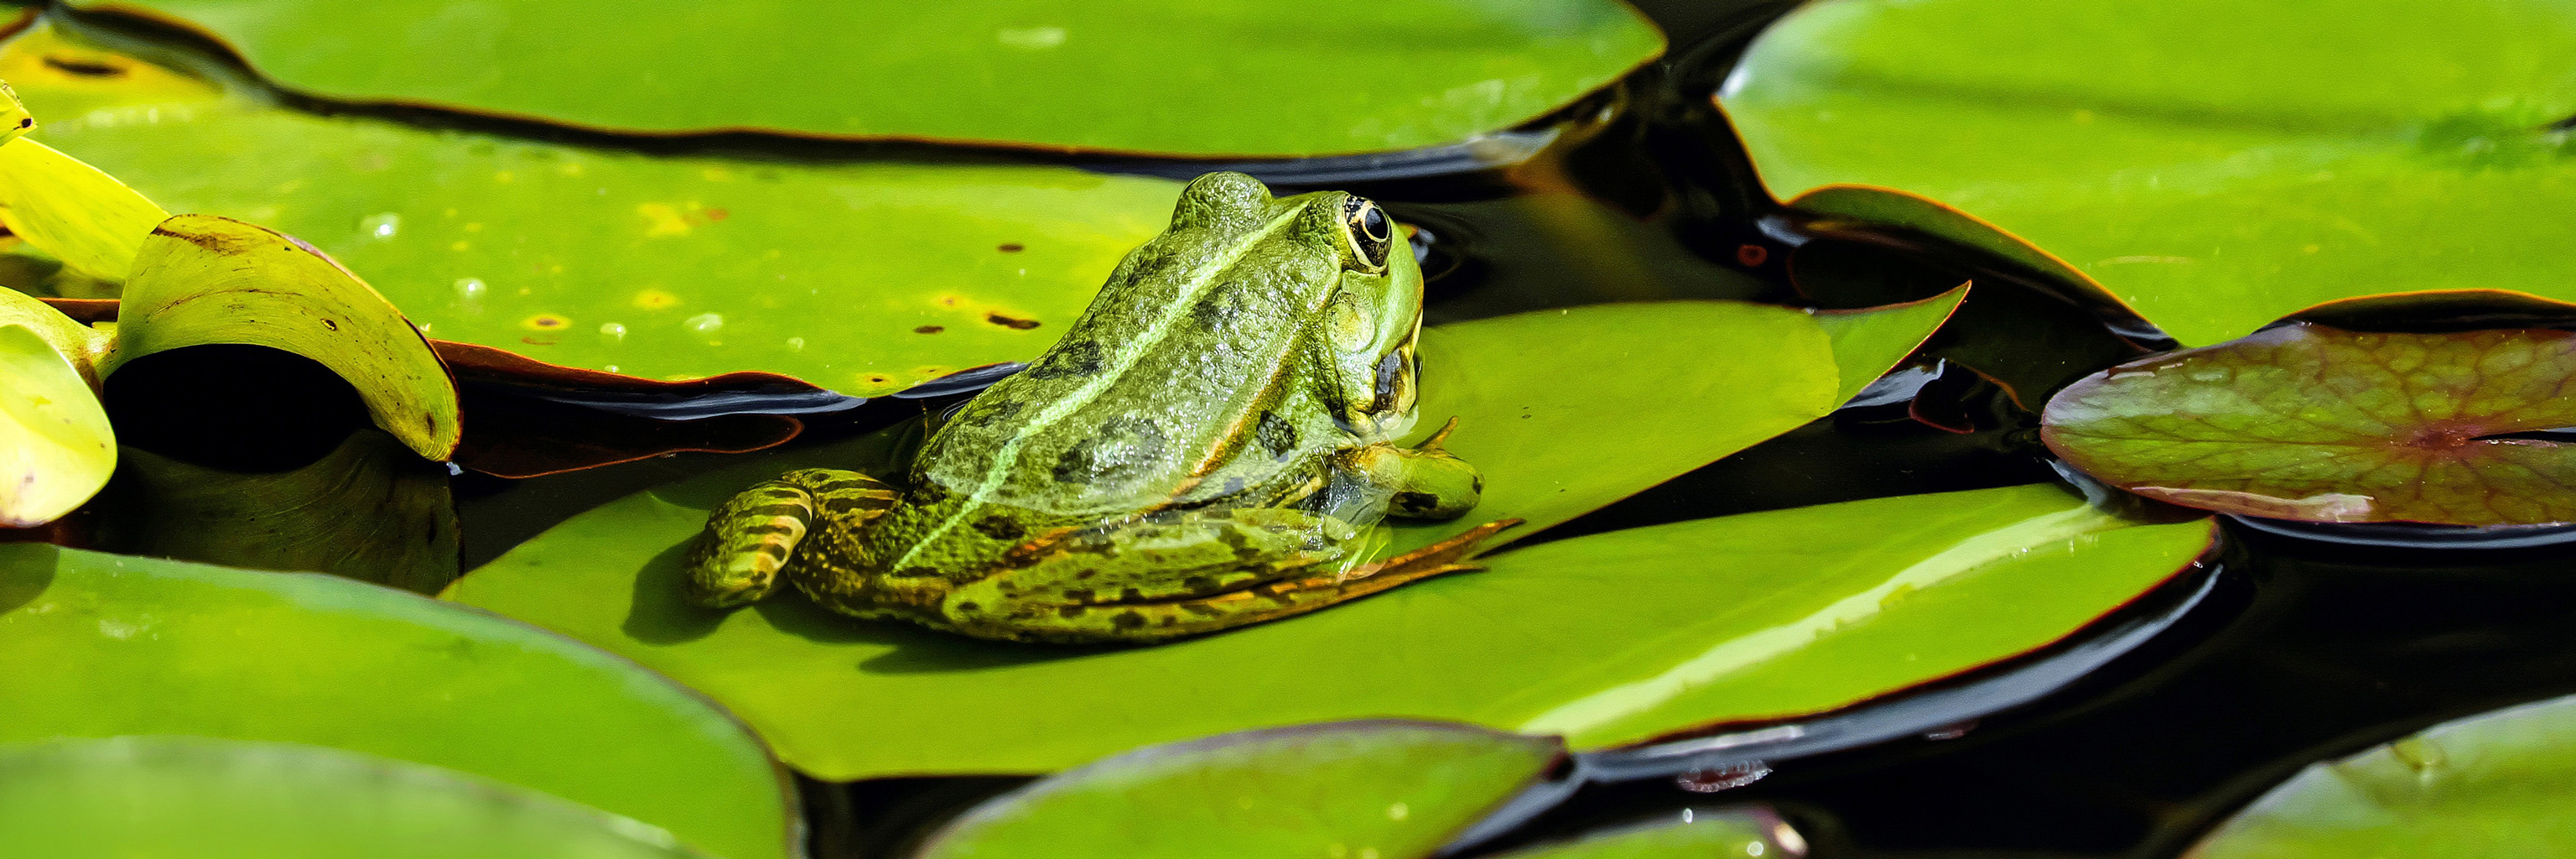 A frog on a lilly pad